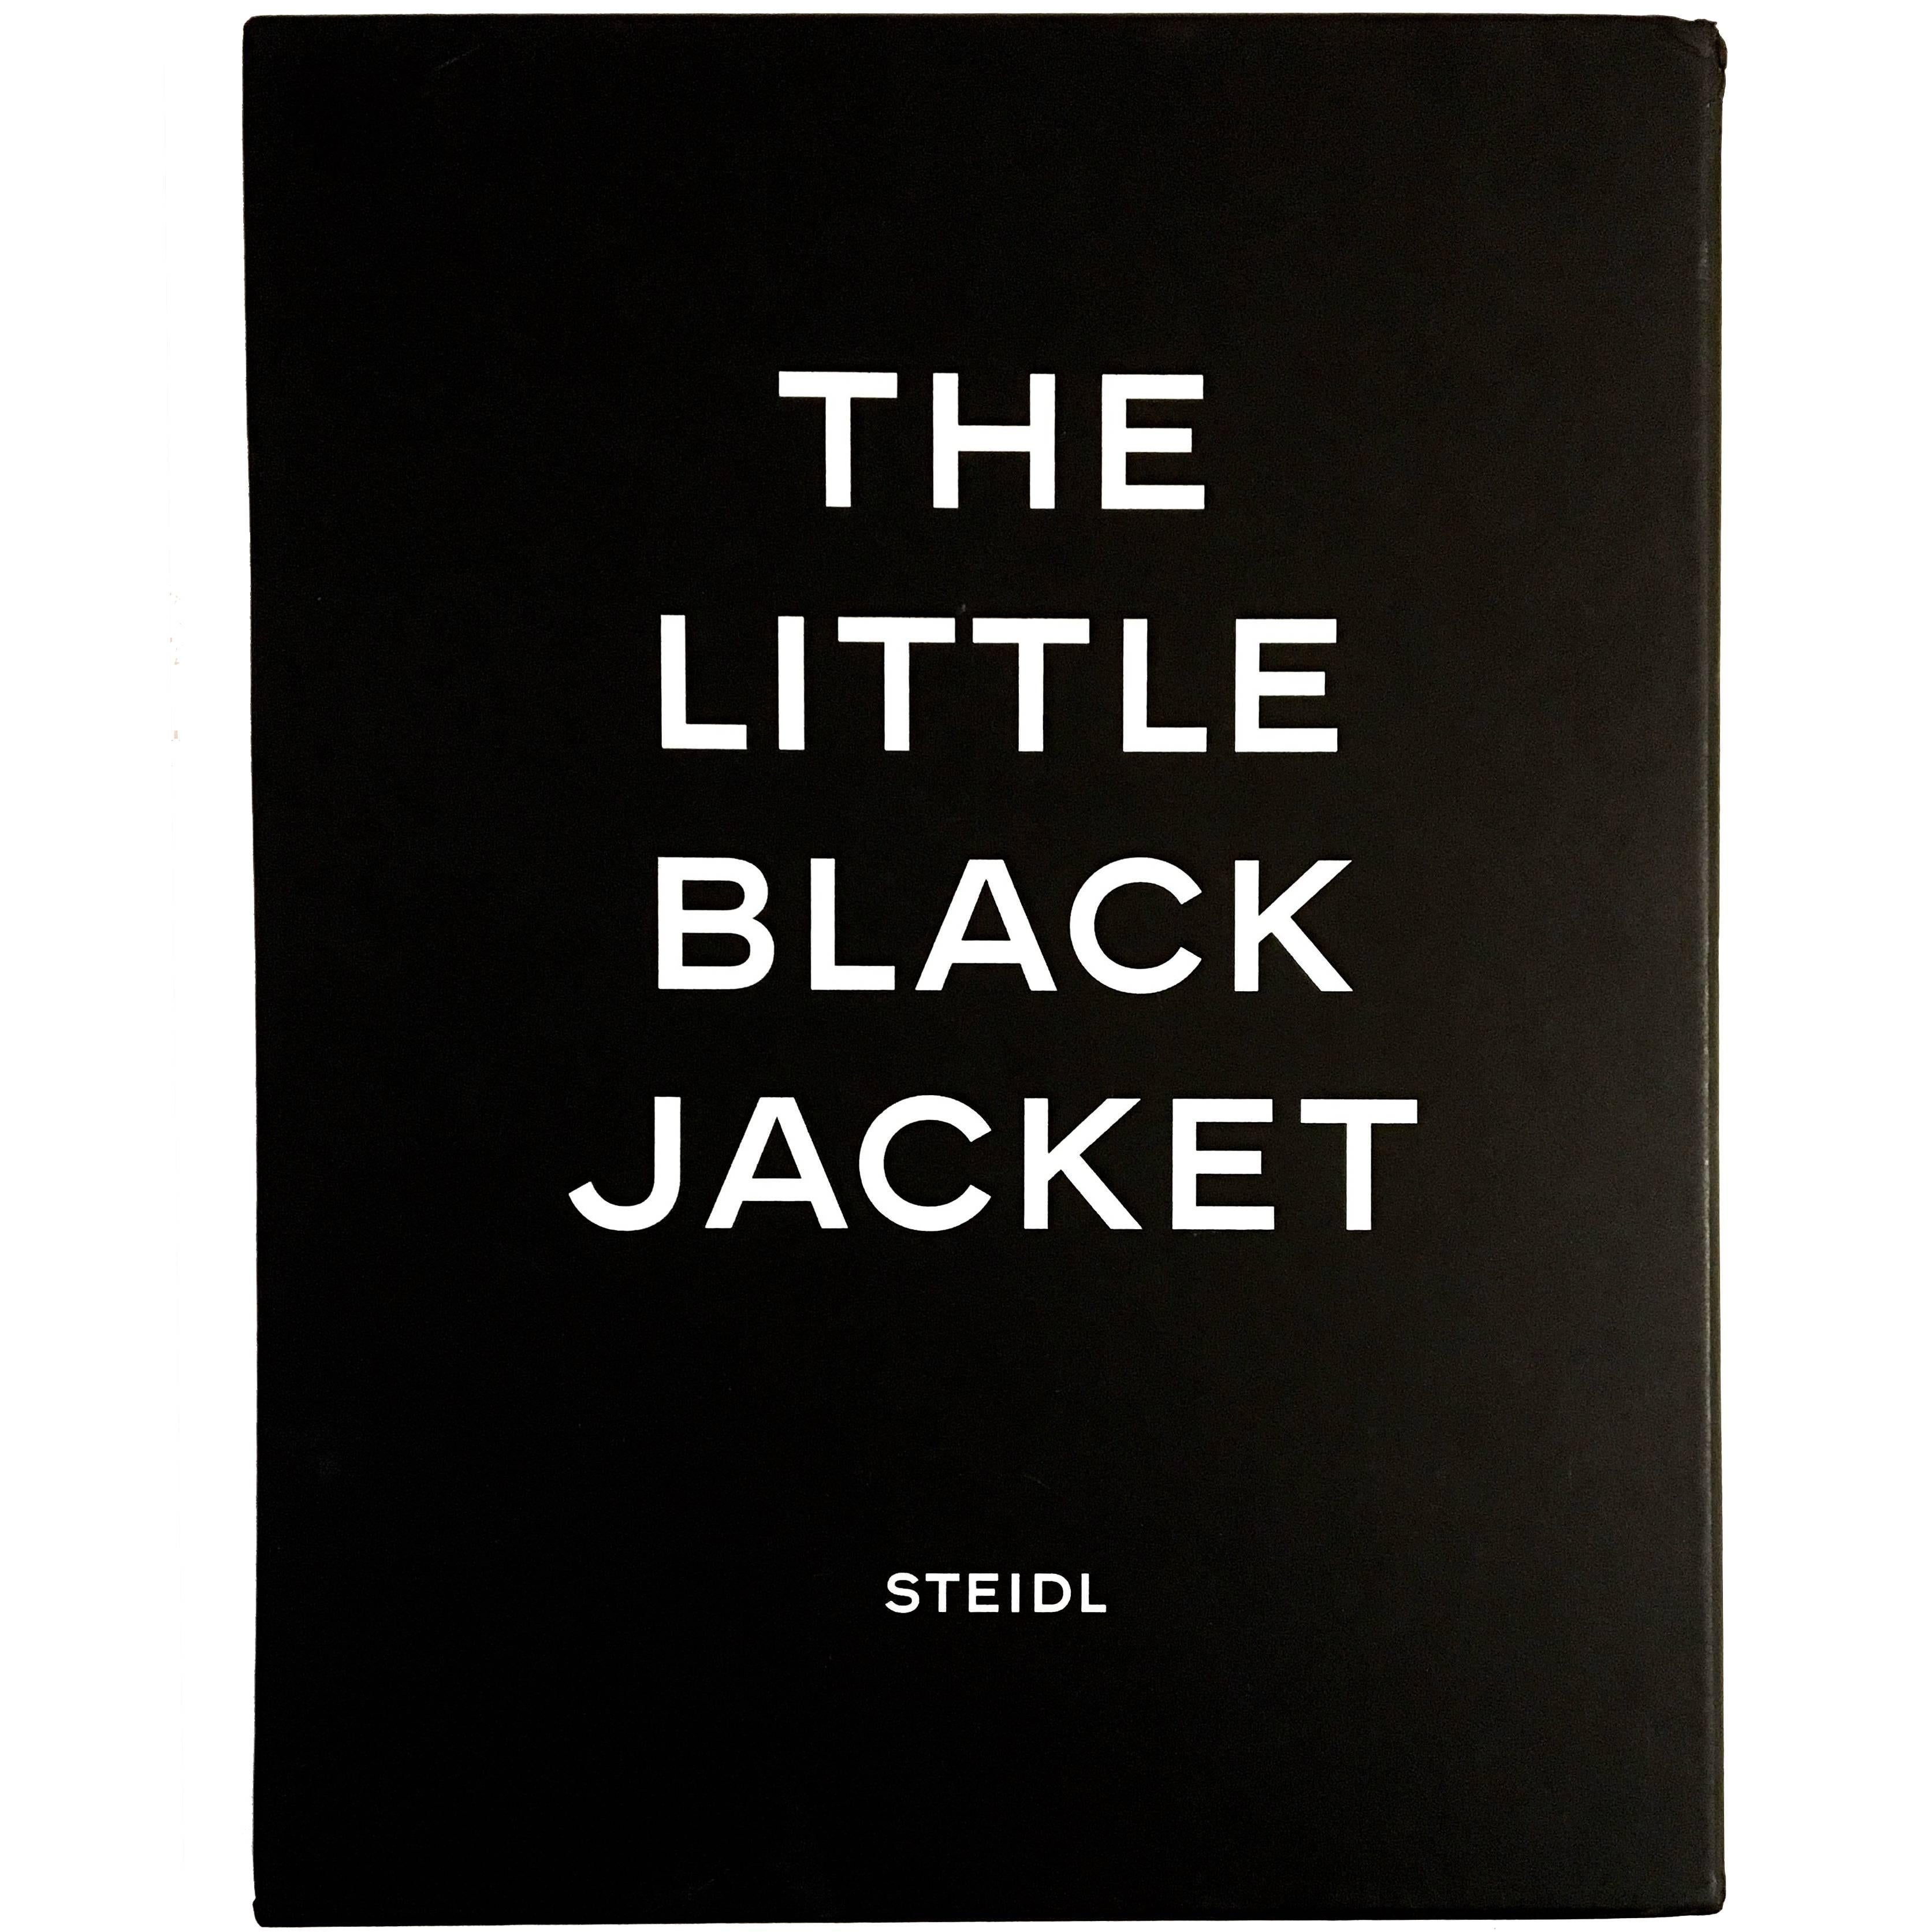 Rare Chanel "The Little Black Jacket" Coffee Table Book